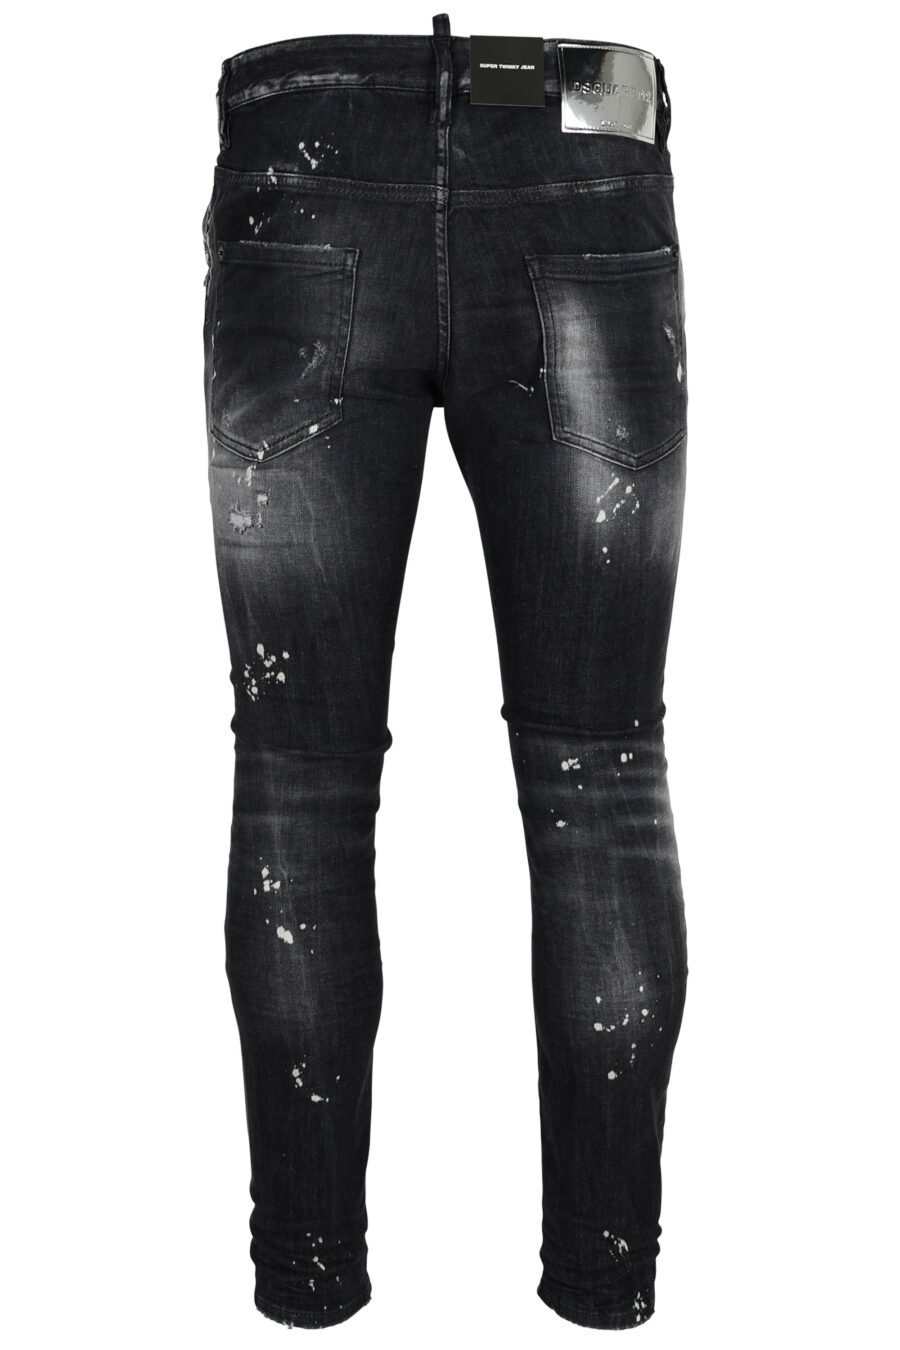 Black jeans "super twinky jean" with rips and semi-worn - 8054148473945 2